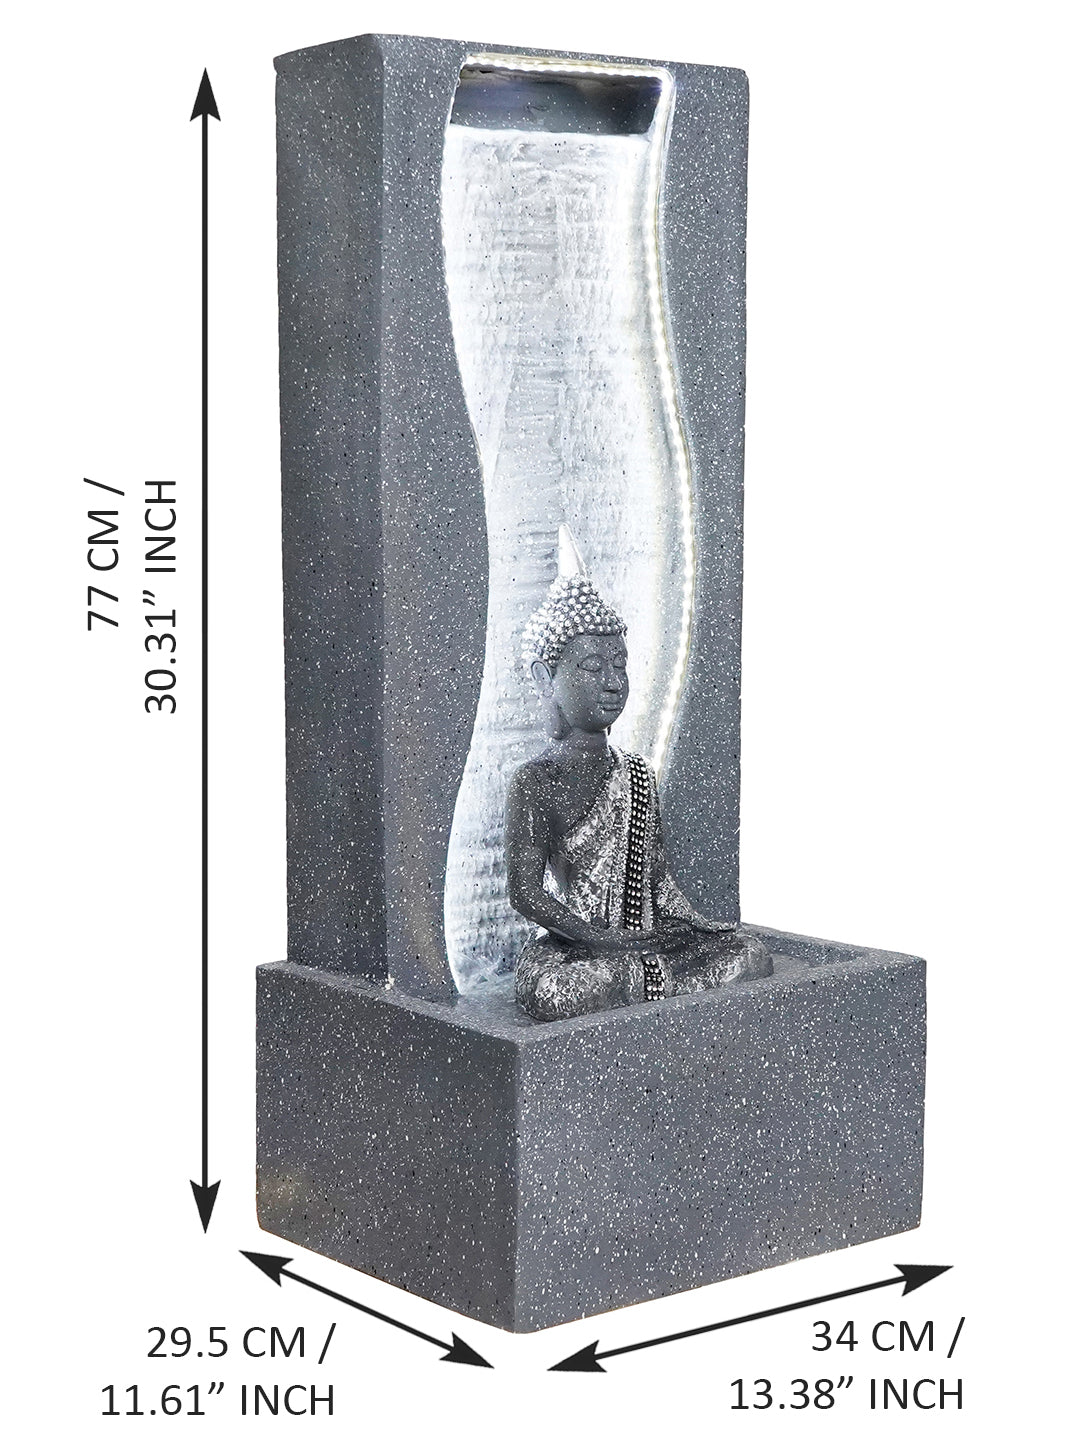 Polystone Decorative Grey Lord Buddha Statue Water Fountain Showpiece with LED Light Effect 2